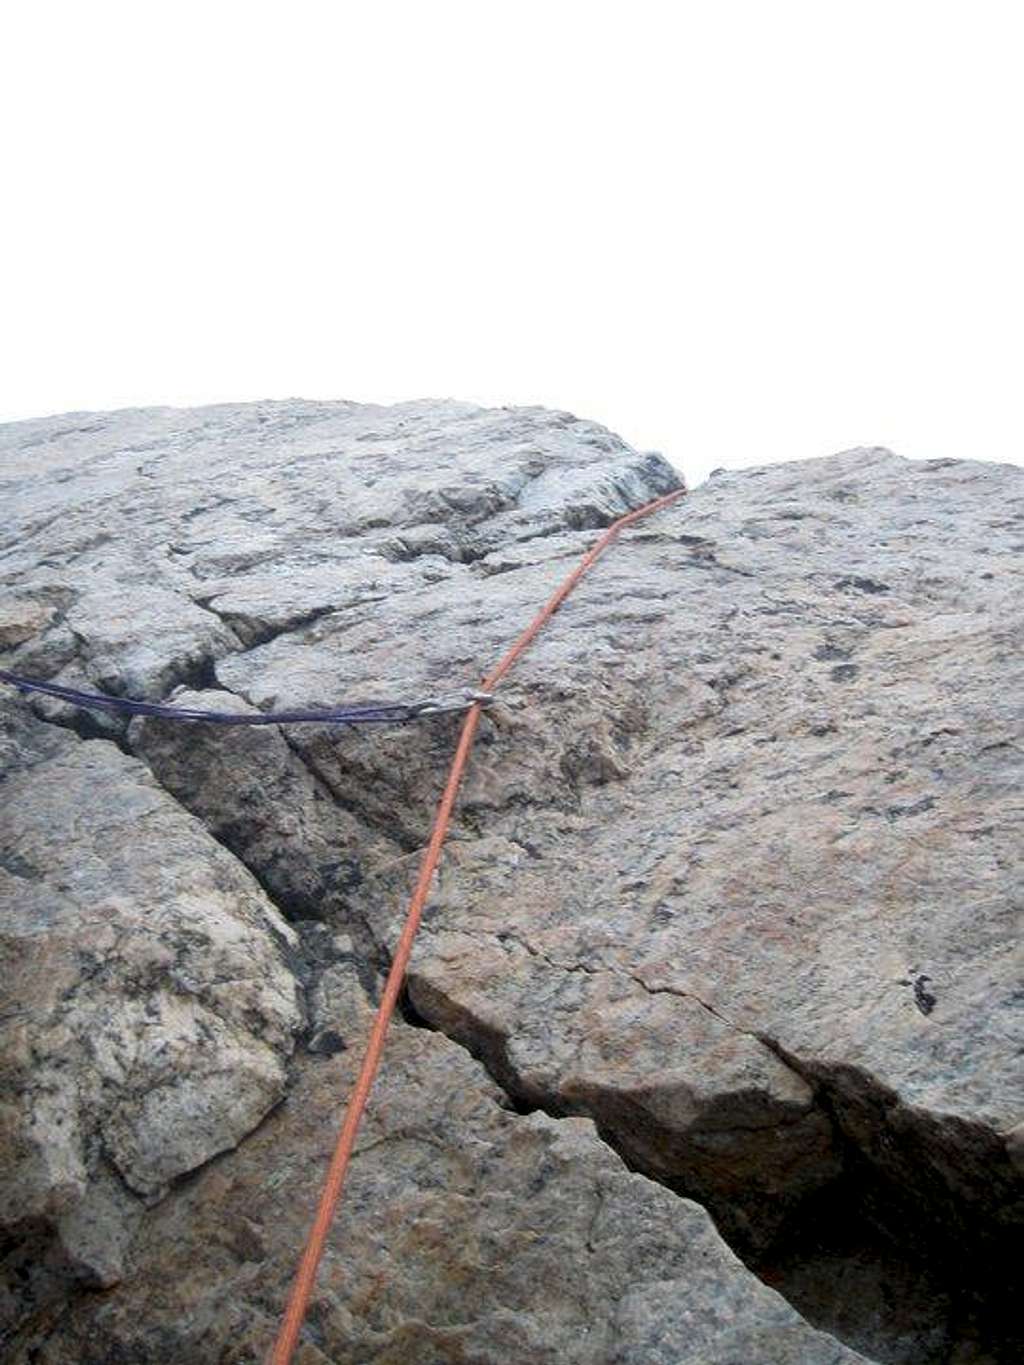 The one 5.7 pitch on the Upper Exum, just above Wall Street